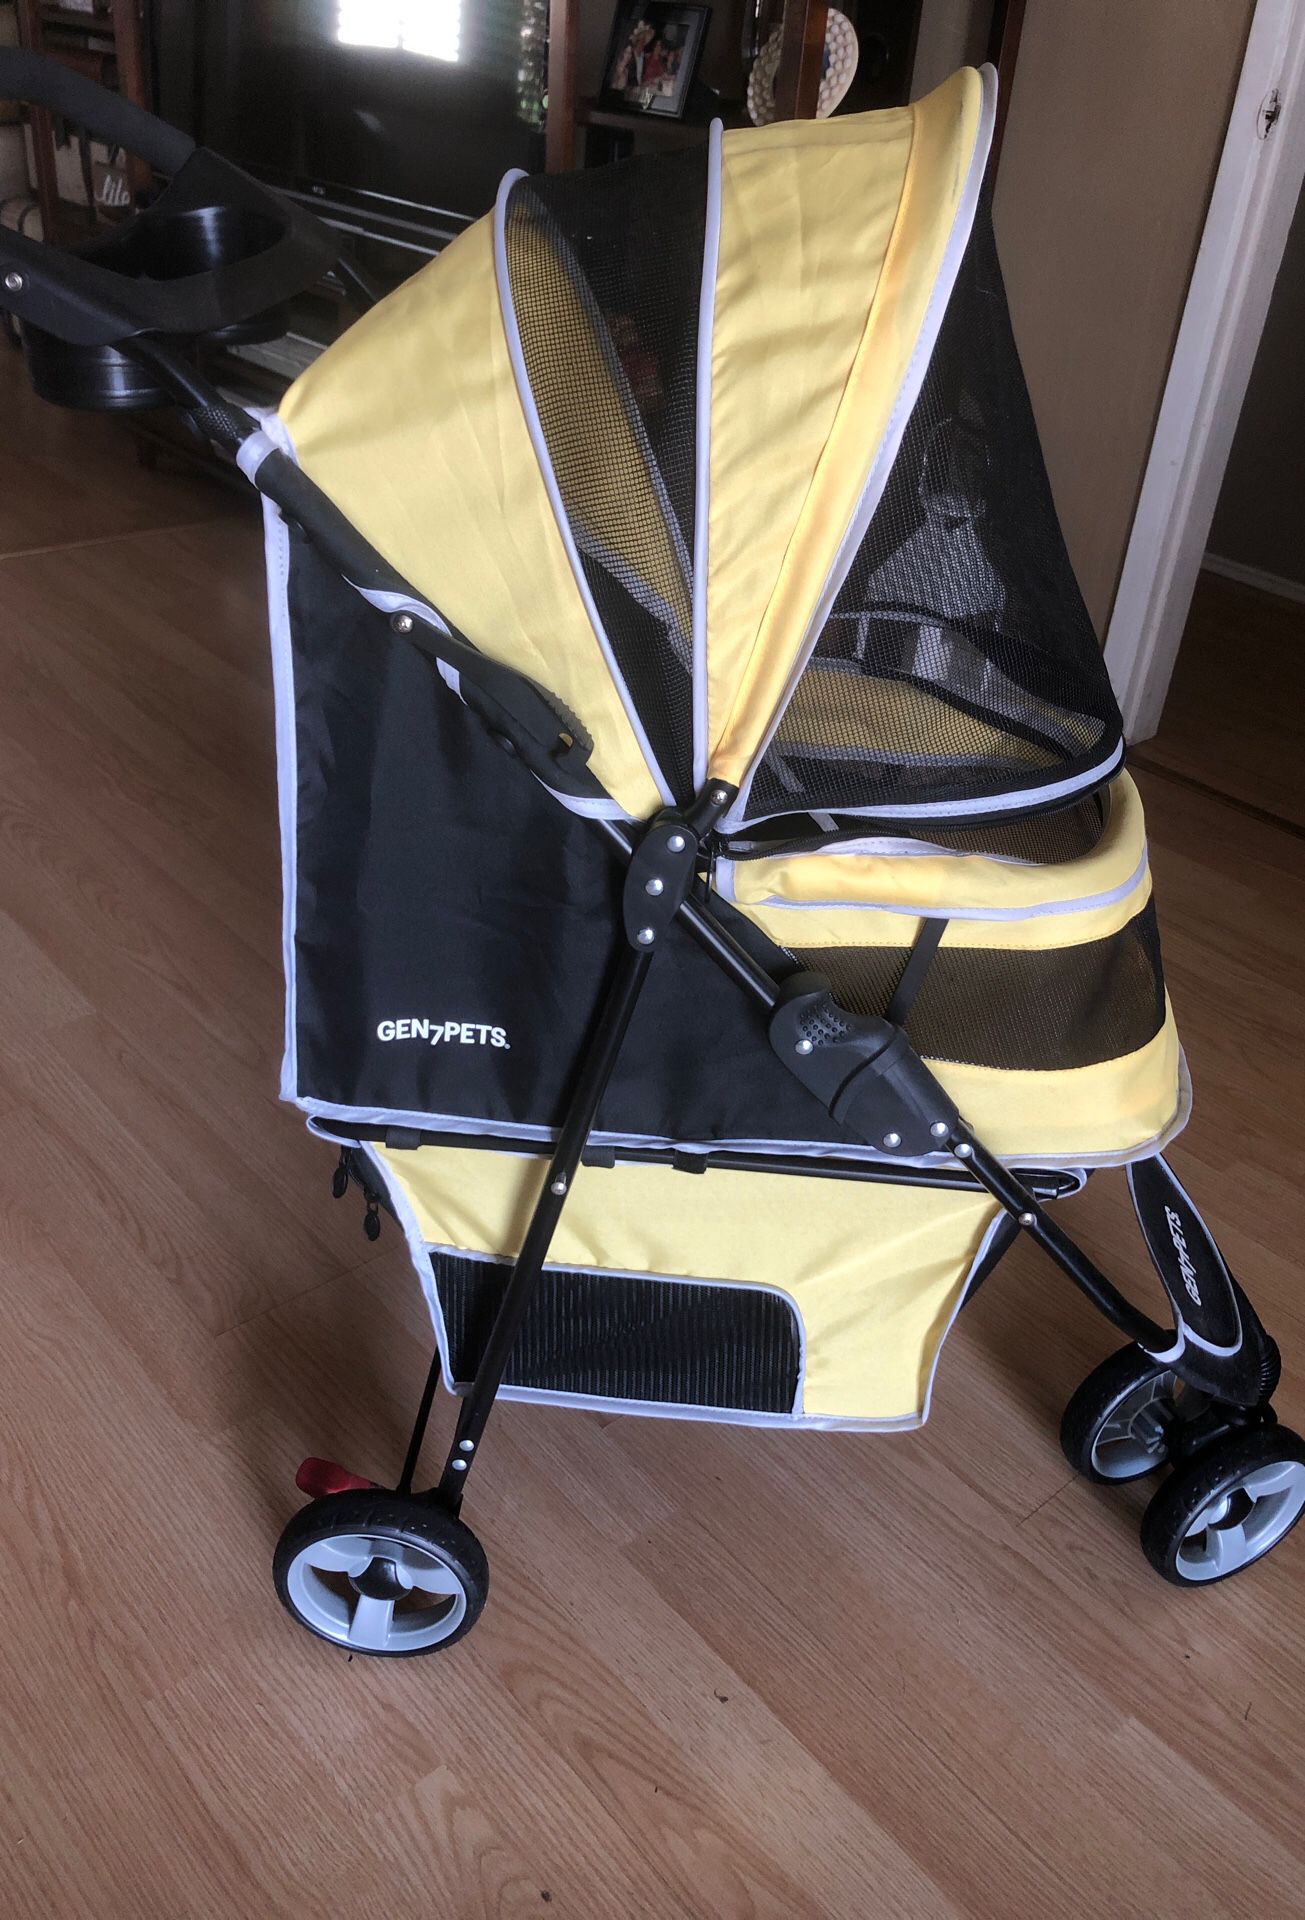 Dog stroller holds up to 25lbs (never been used)